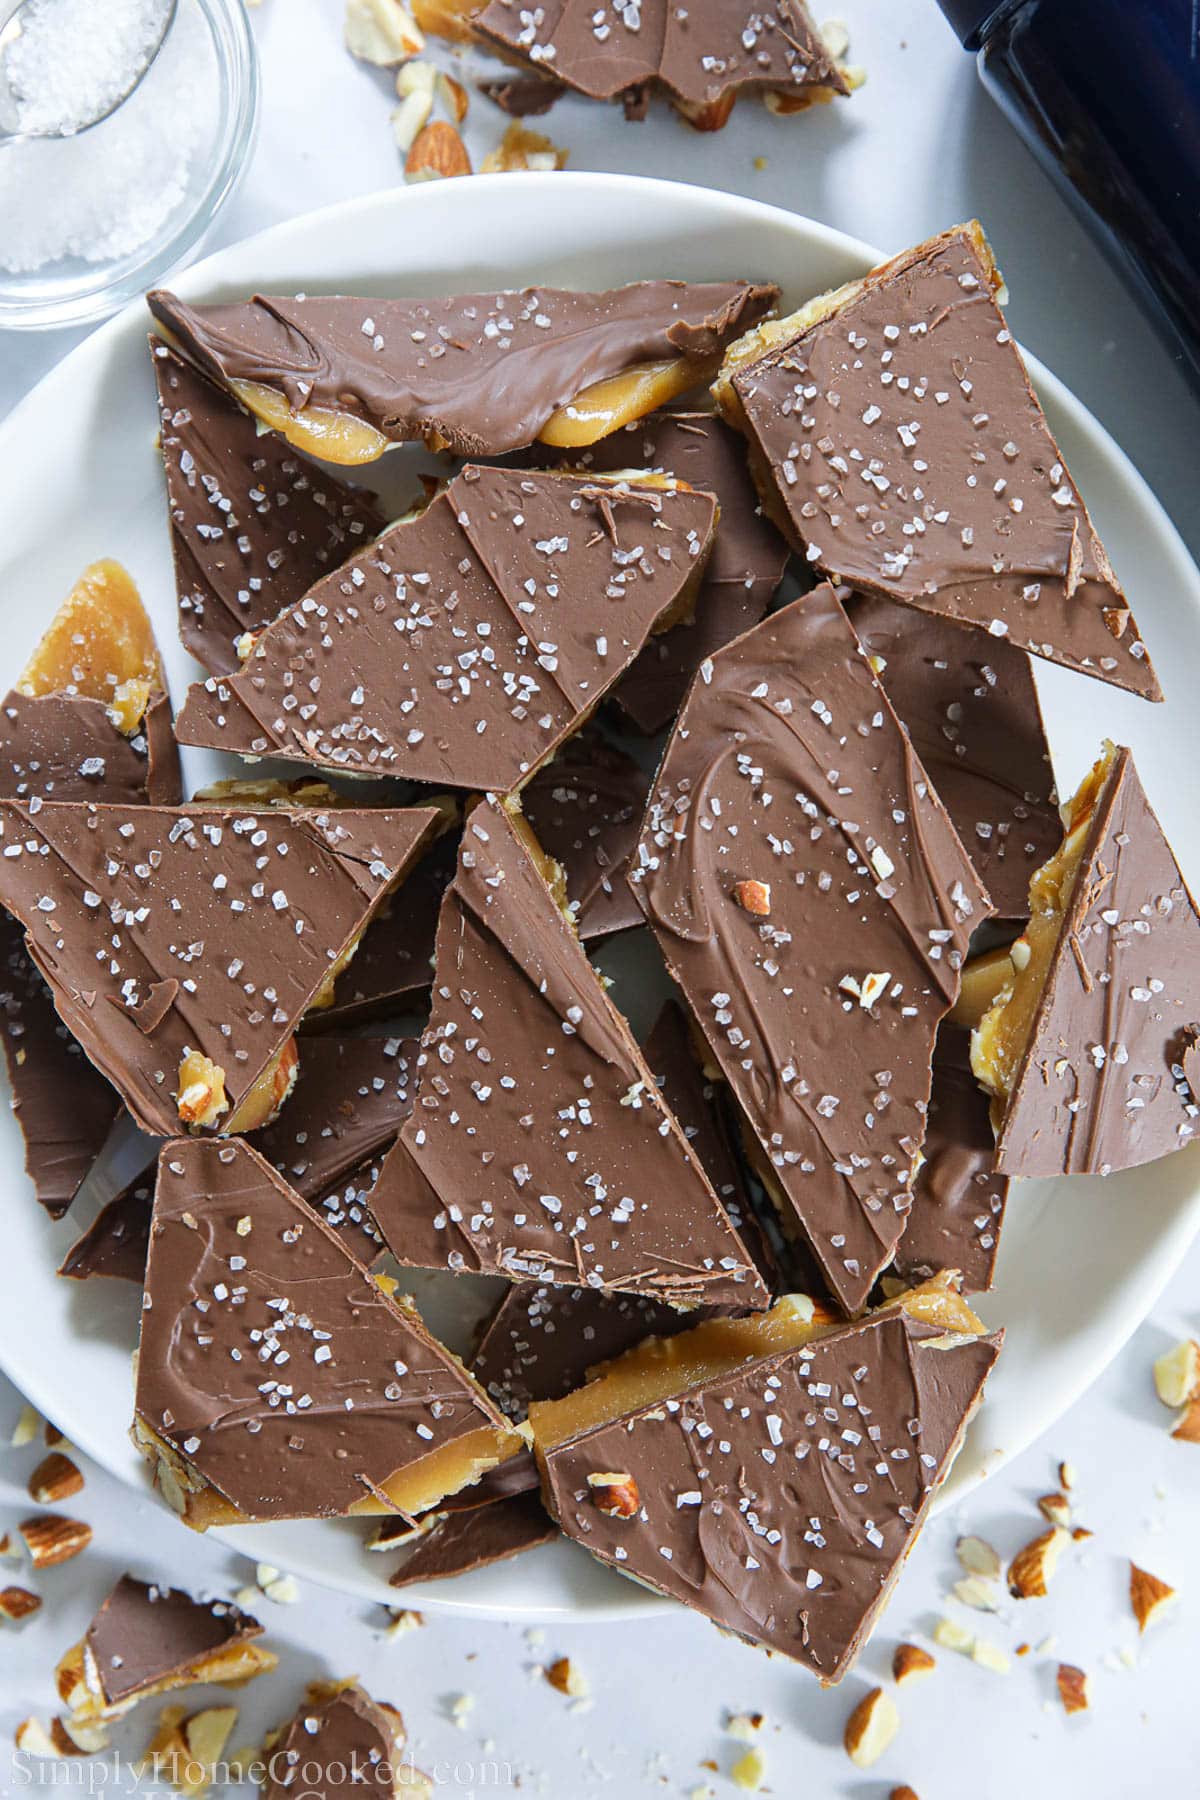 Plate of Easy Toffee.